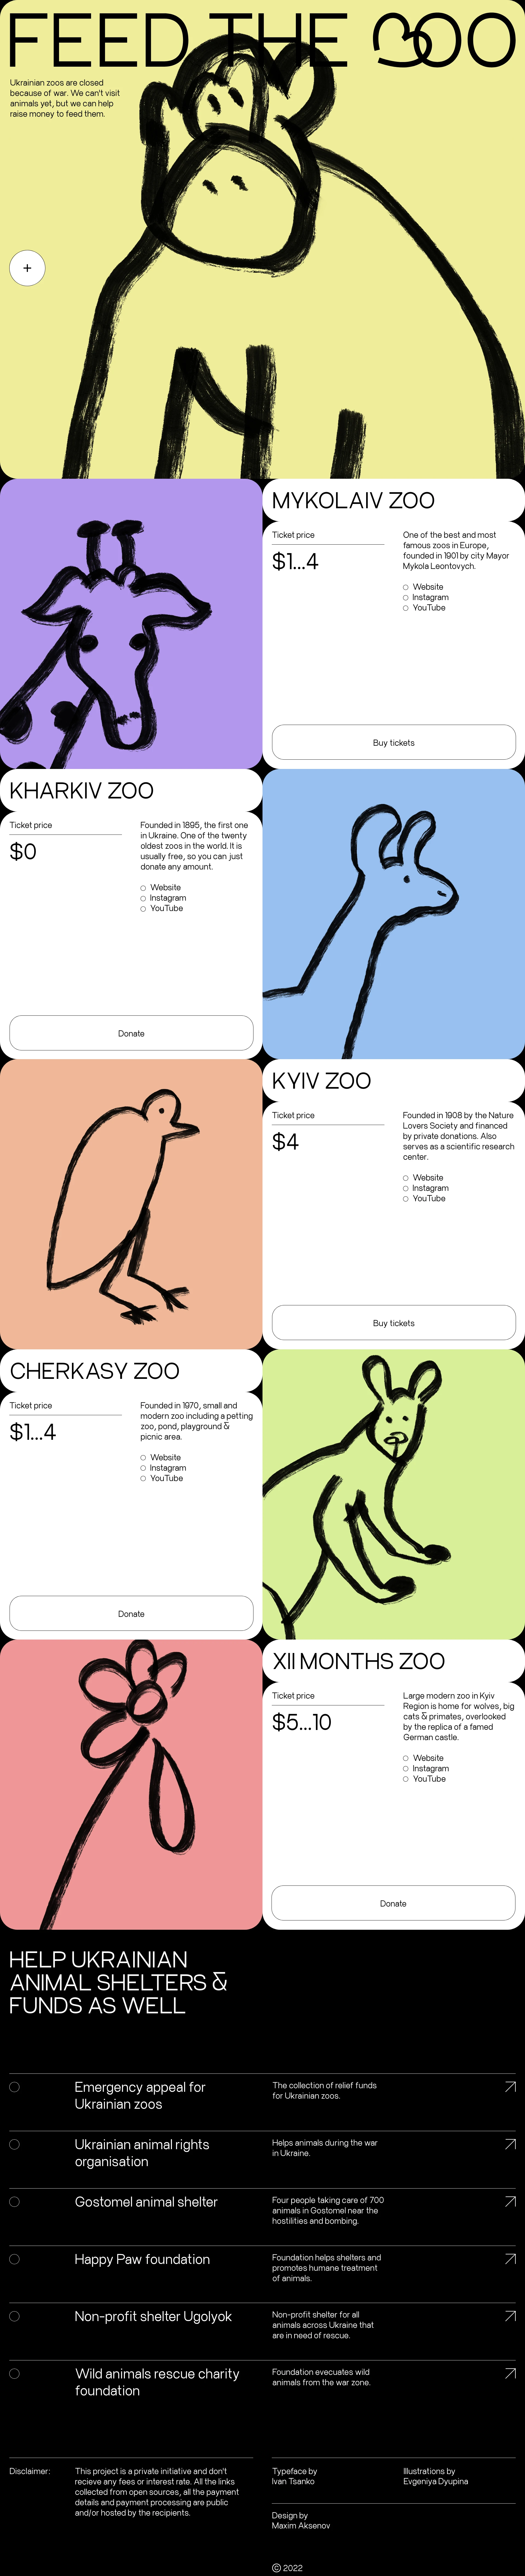 FEED THE 3OO Landing Page Example: Help raise money for Ukrainian zoos, funds and animal shelters.